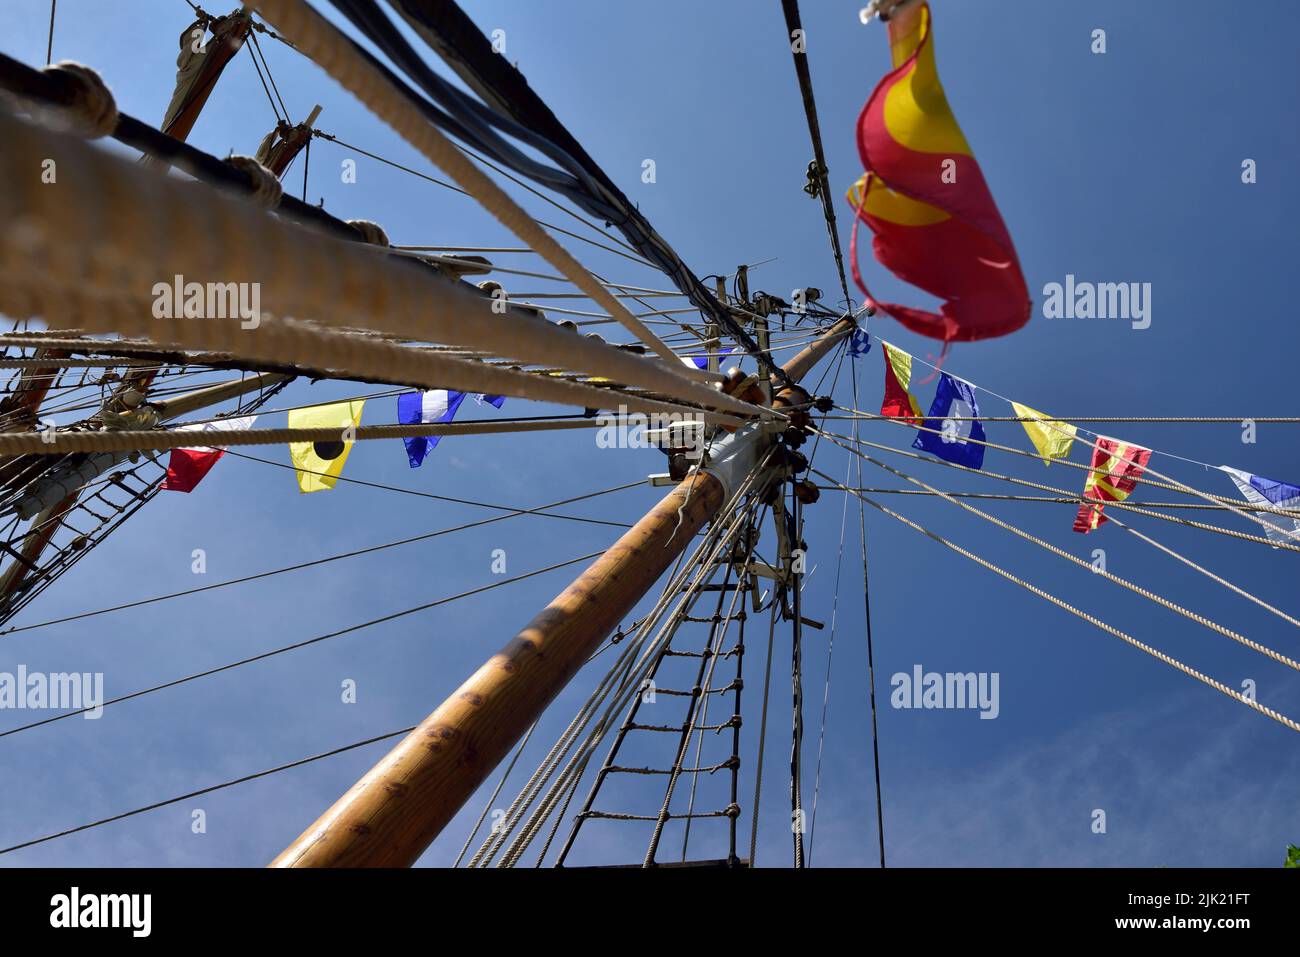 Mast and rigging on tall sailing ship Stock Photo